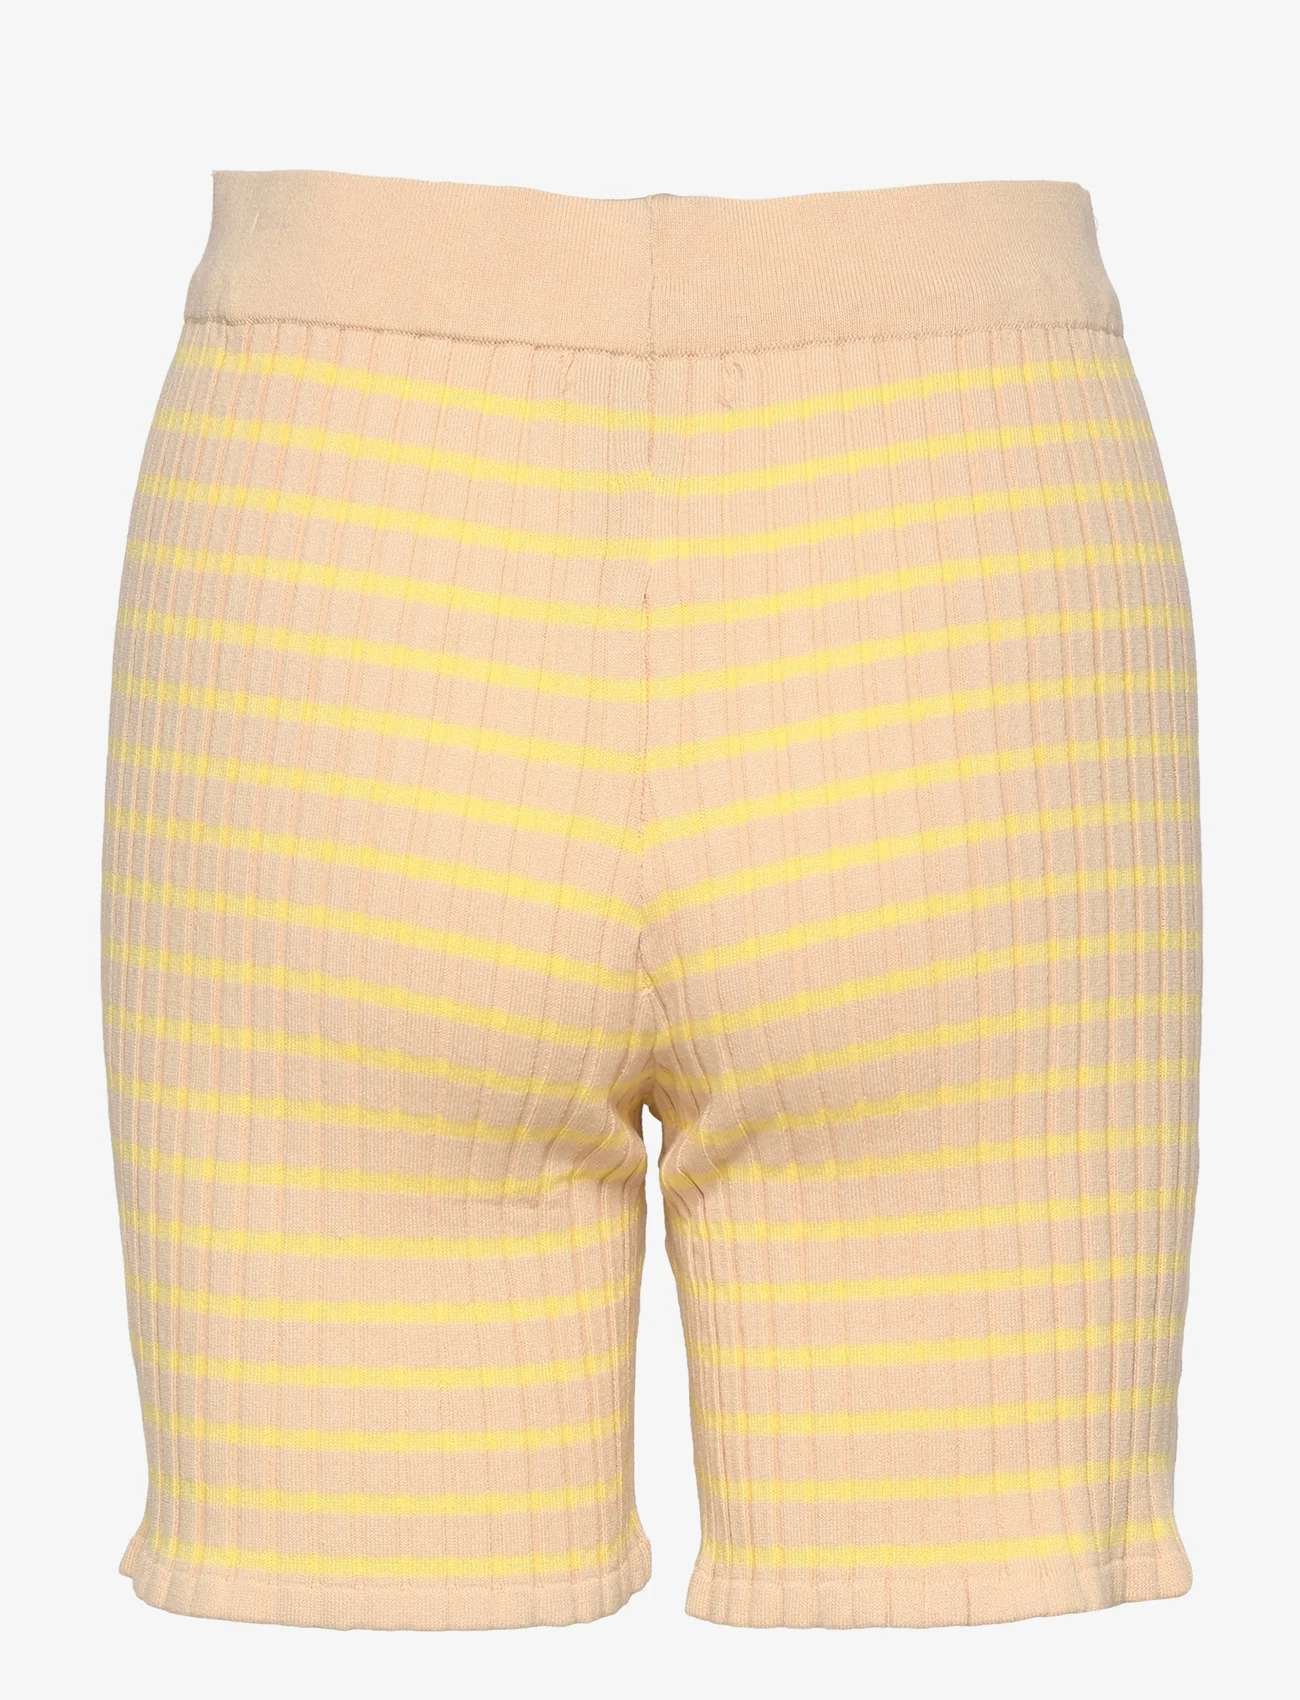 A-View - Sira shorts - laveste priser - beige/yellow - 1